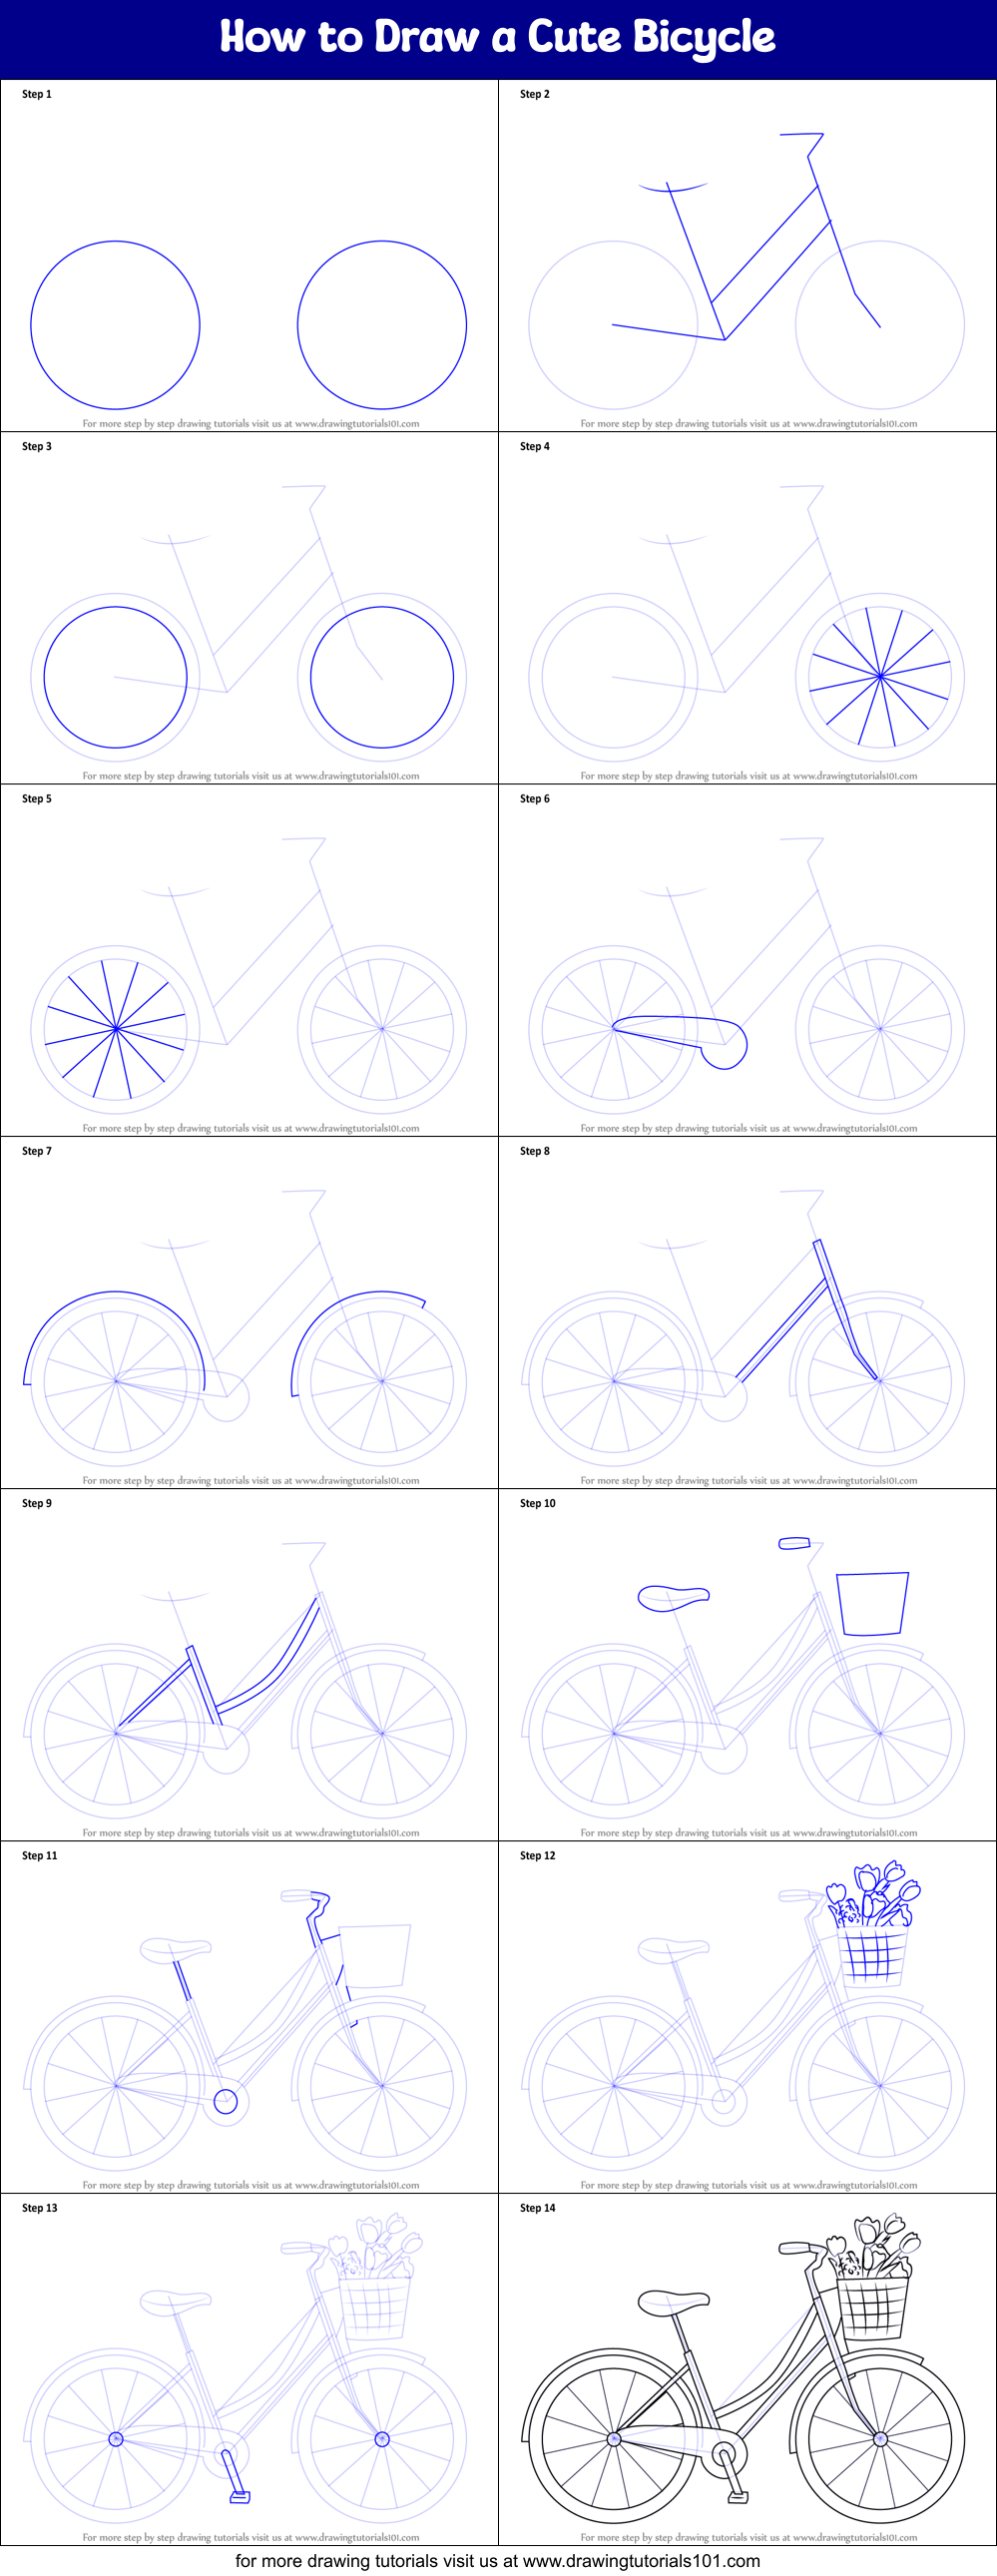 How to Draw a Cute Bicycle printable step by step drawing sheet 